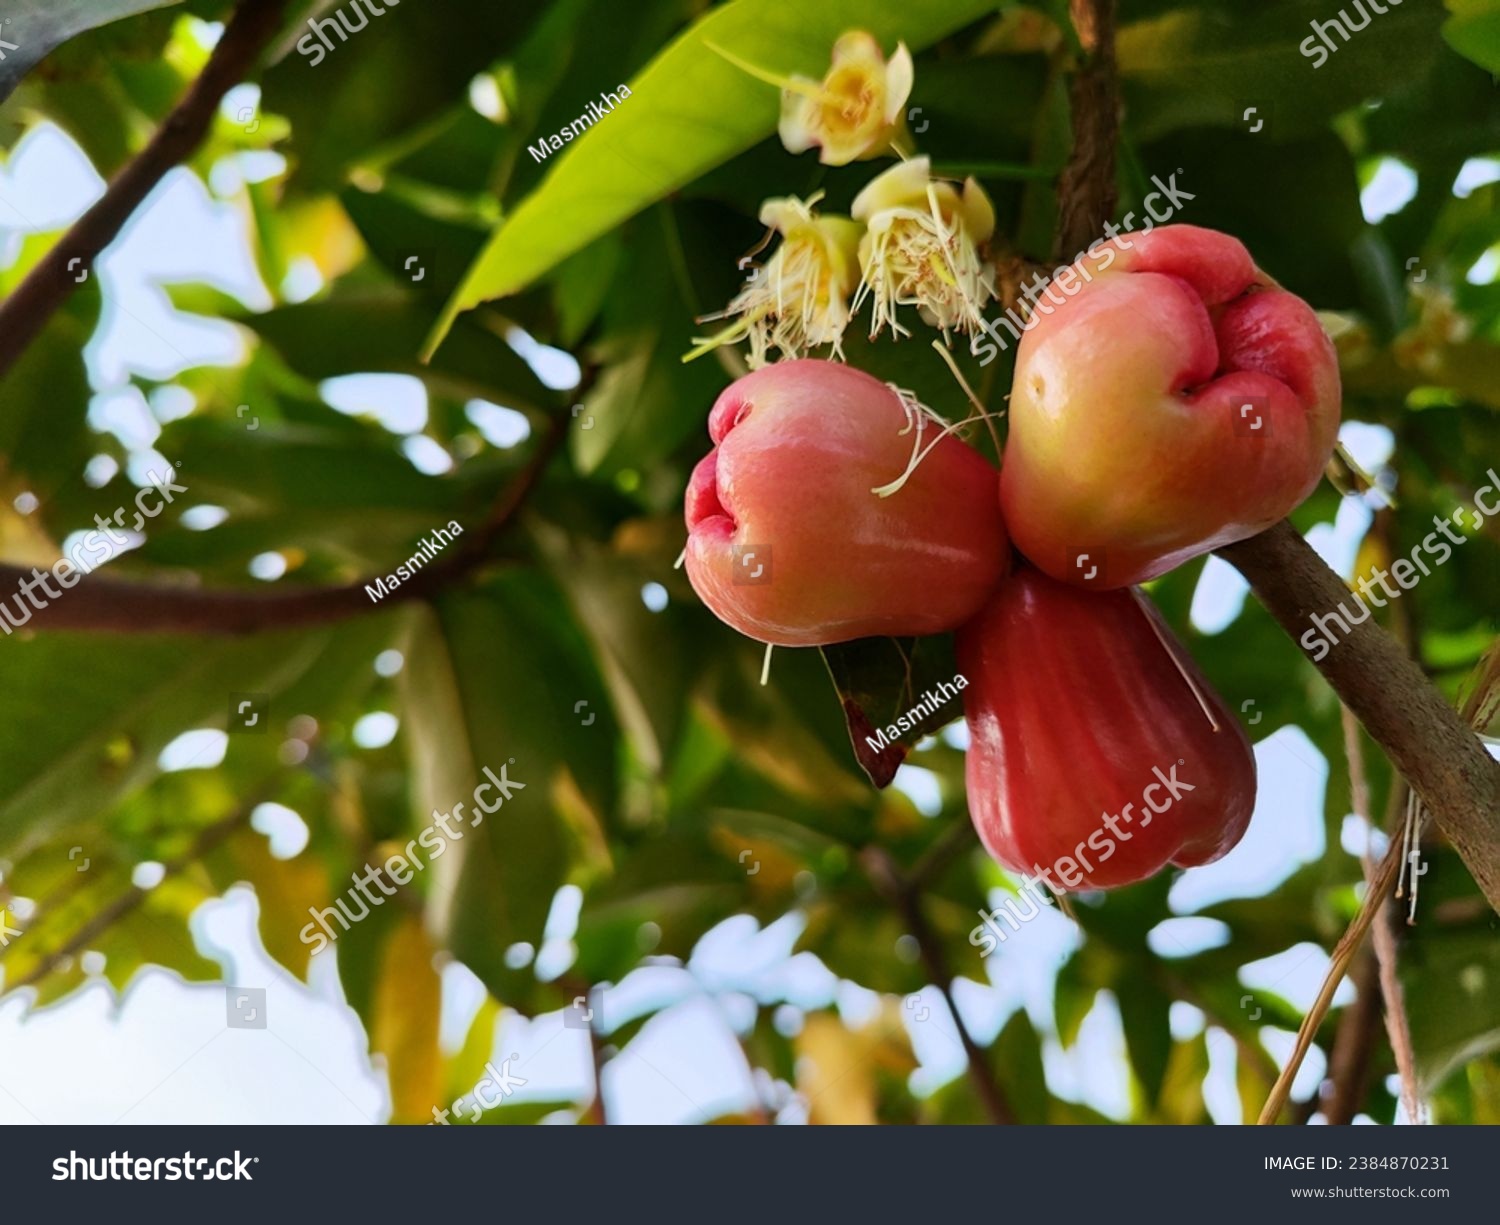 Syzygium aqueum (watery rose apple, water apple, bell fruit, jambu air) fruits on the tree. The fruit has a very mild and slightly sweet taste similar to apples, and a crisp watery texture.   #2384870231